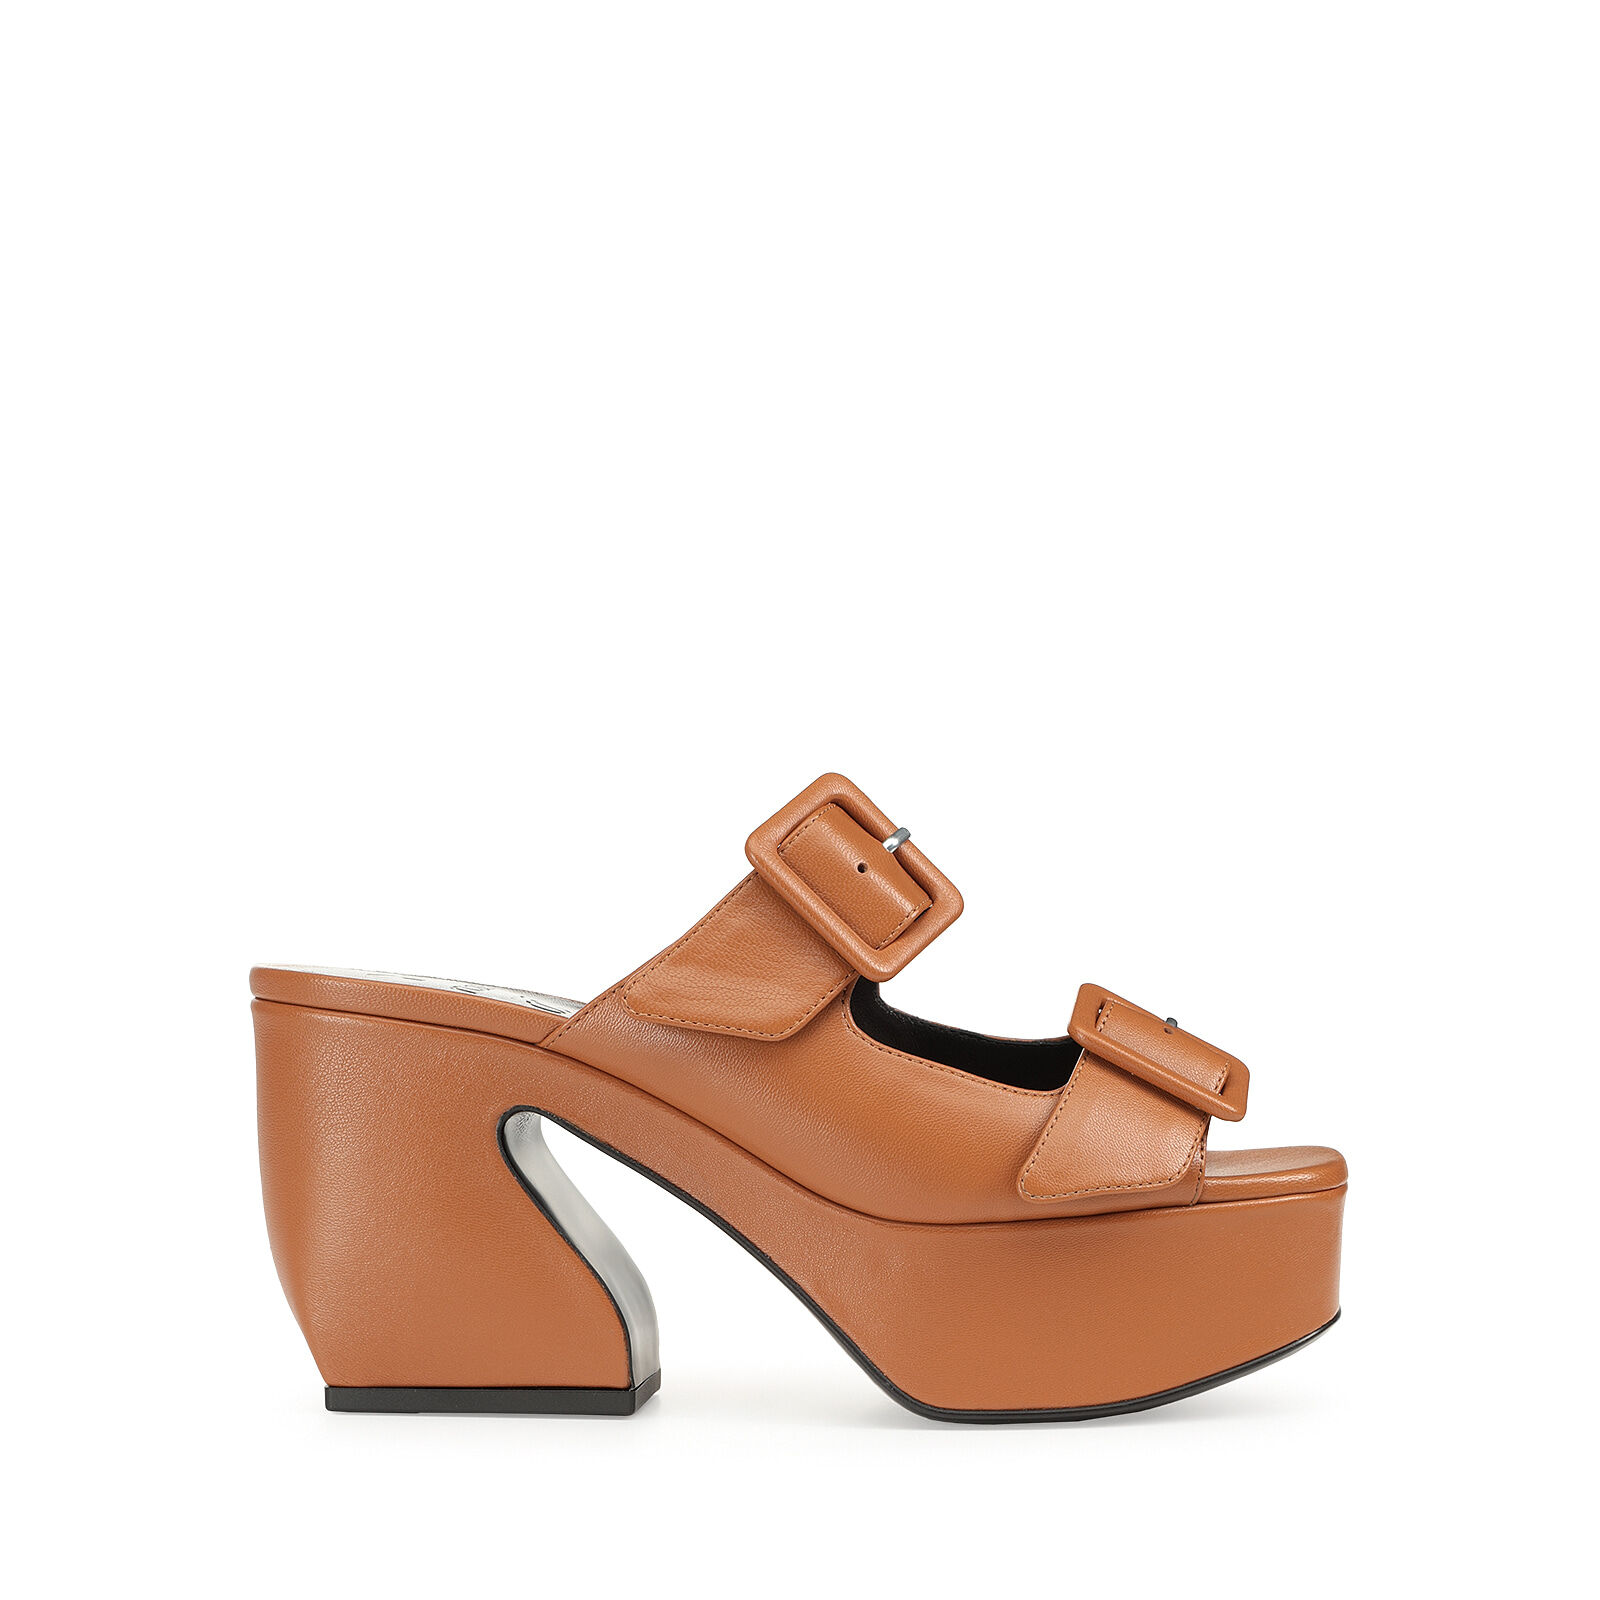 SI ROSSI: Women's Dress Shoes & Heeled Sandals | Sergio Rossi